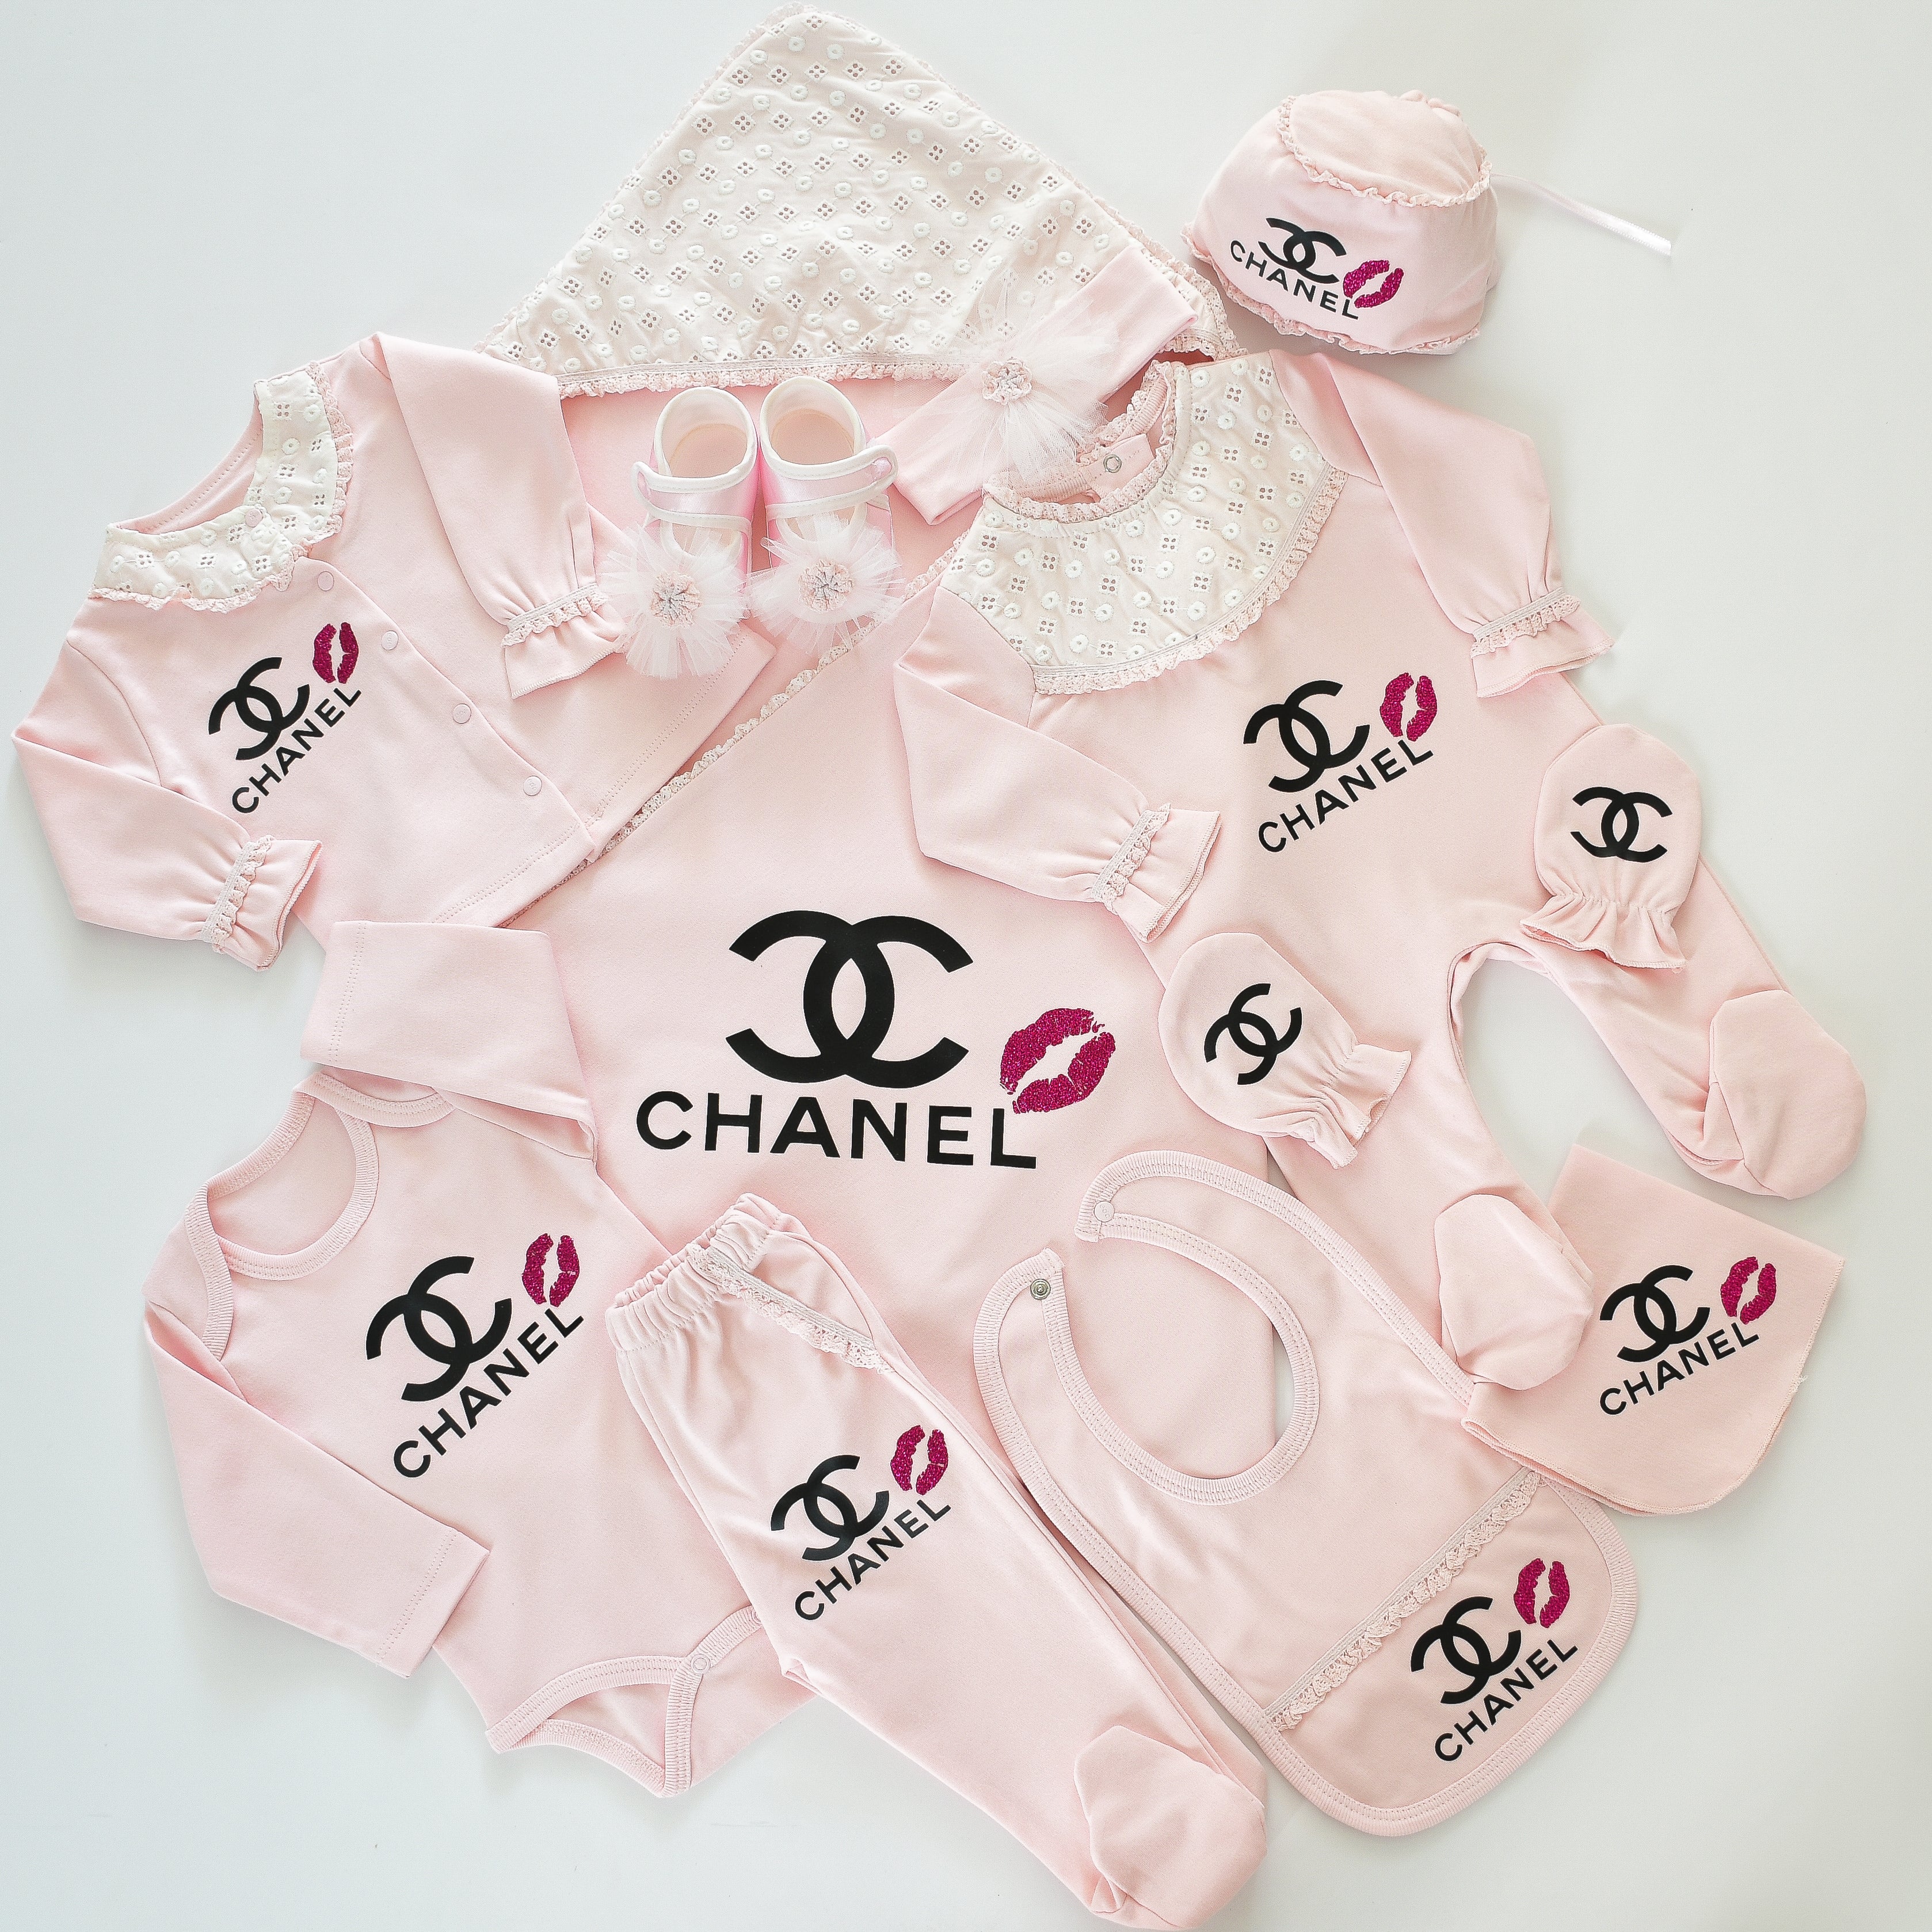 Sphynx Cat Girls Clothes  Chanel Dress with Bow for Sphynx Cat